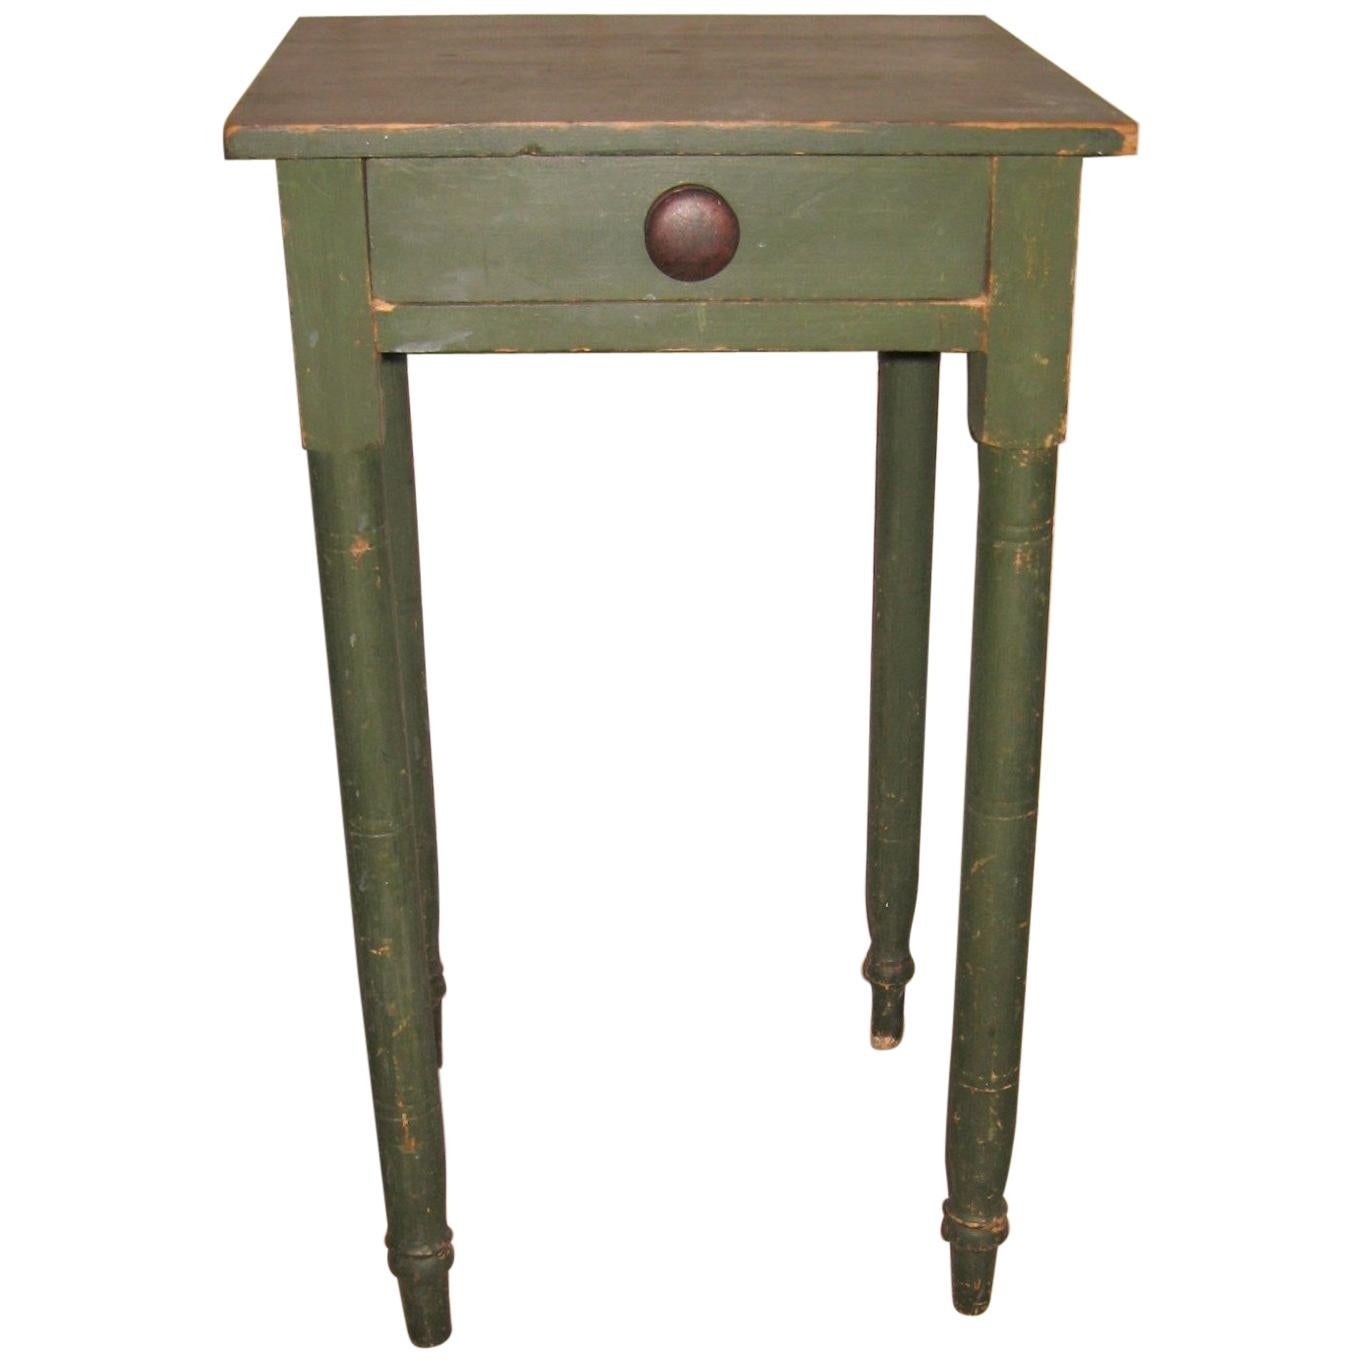 Early 19th Century Primitive 1 Drawer Stand in Old Green Paint